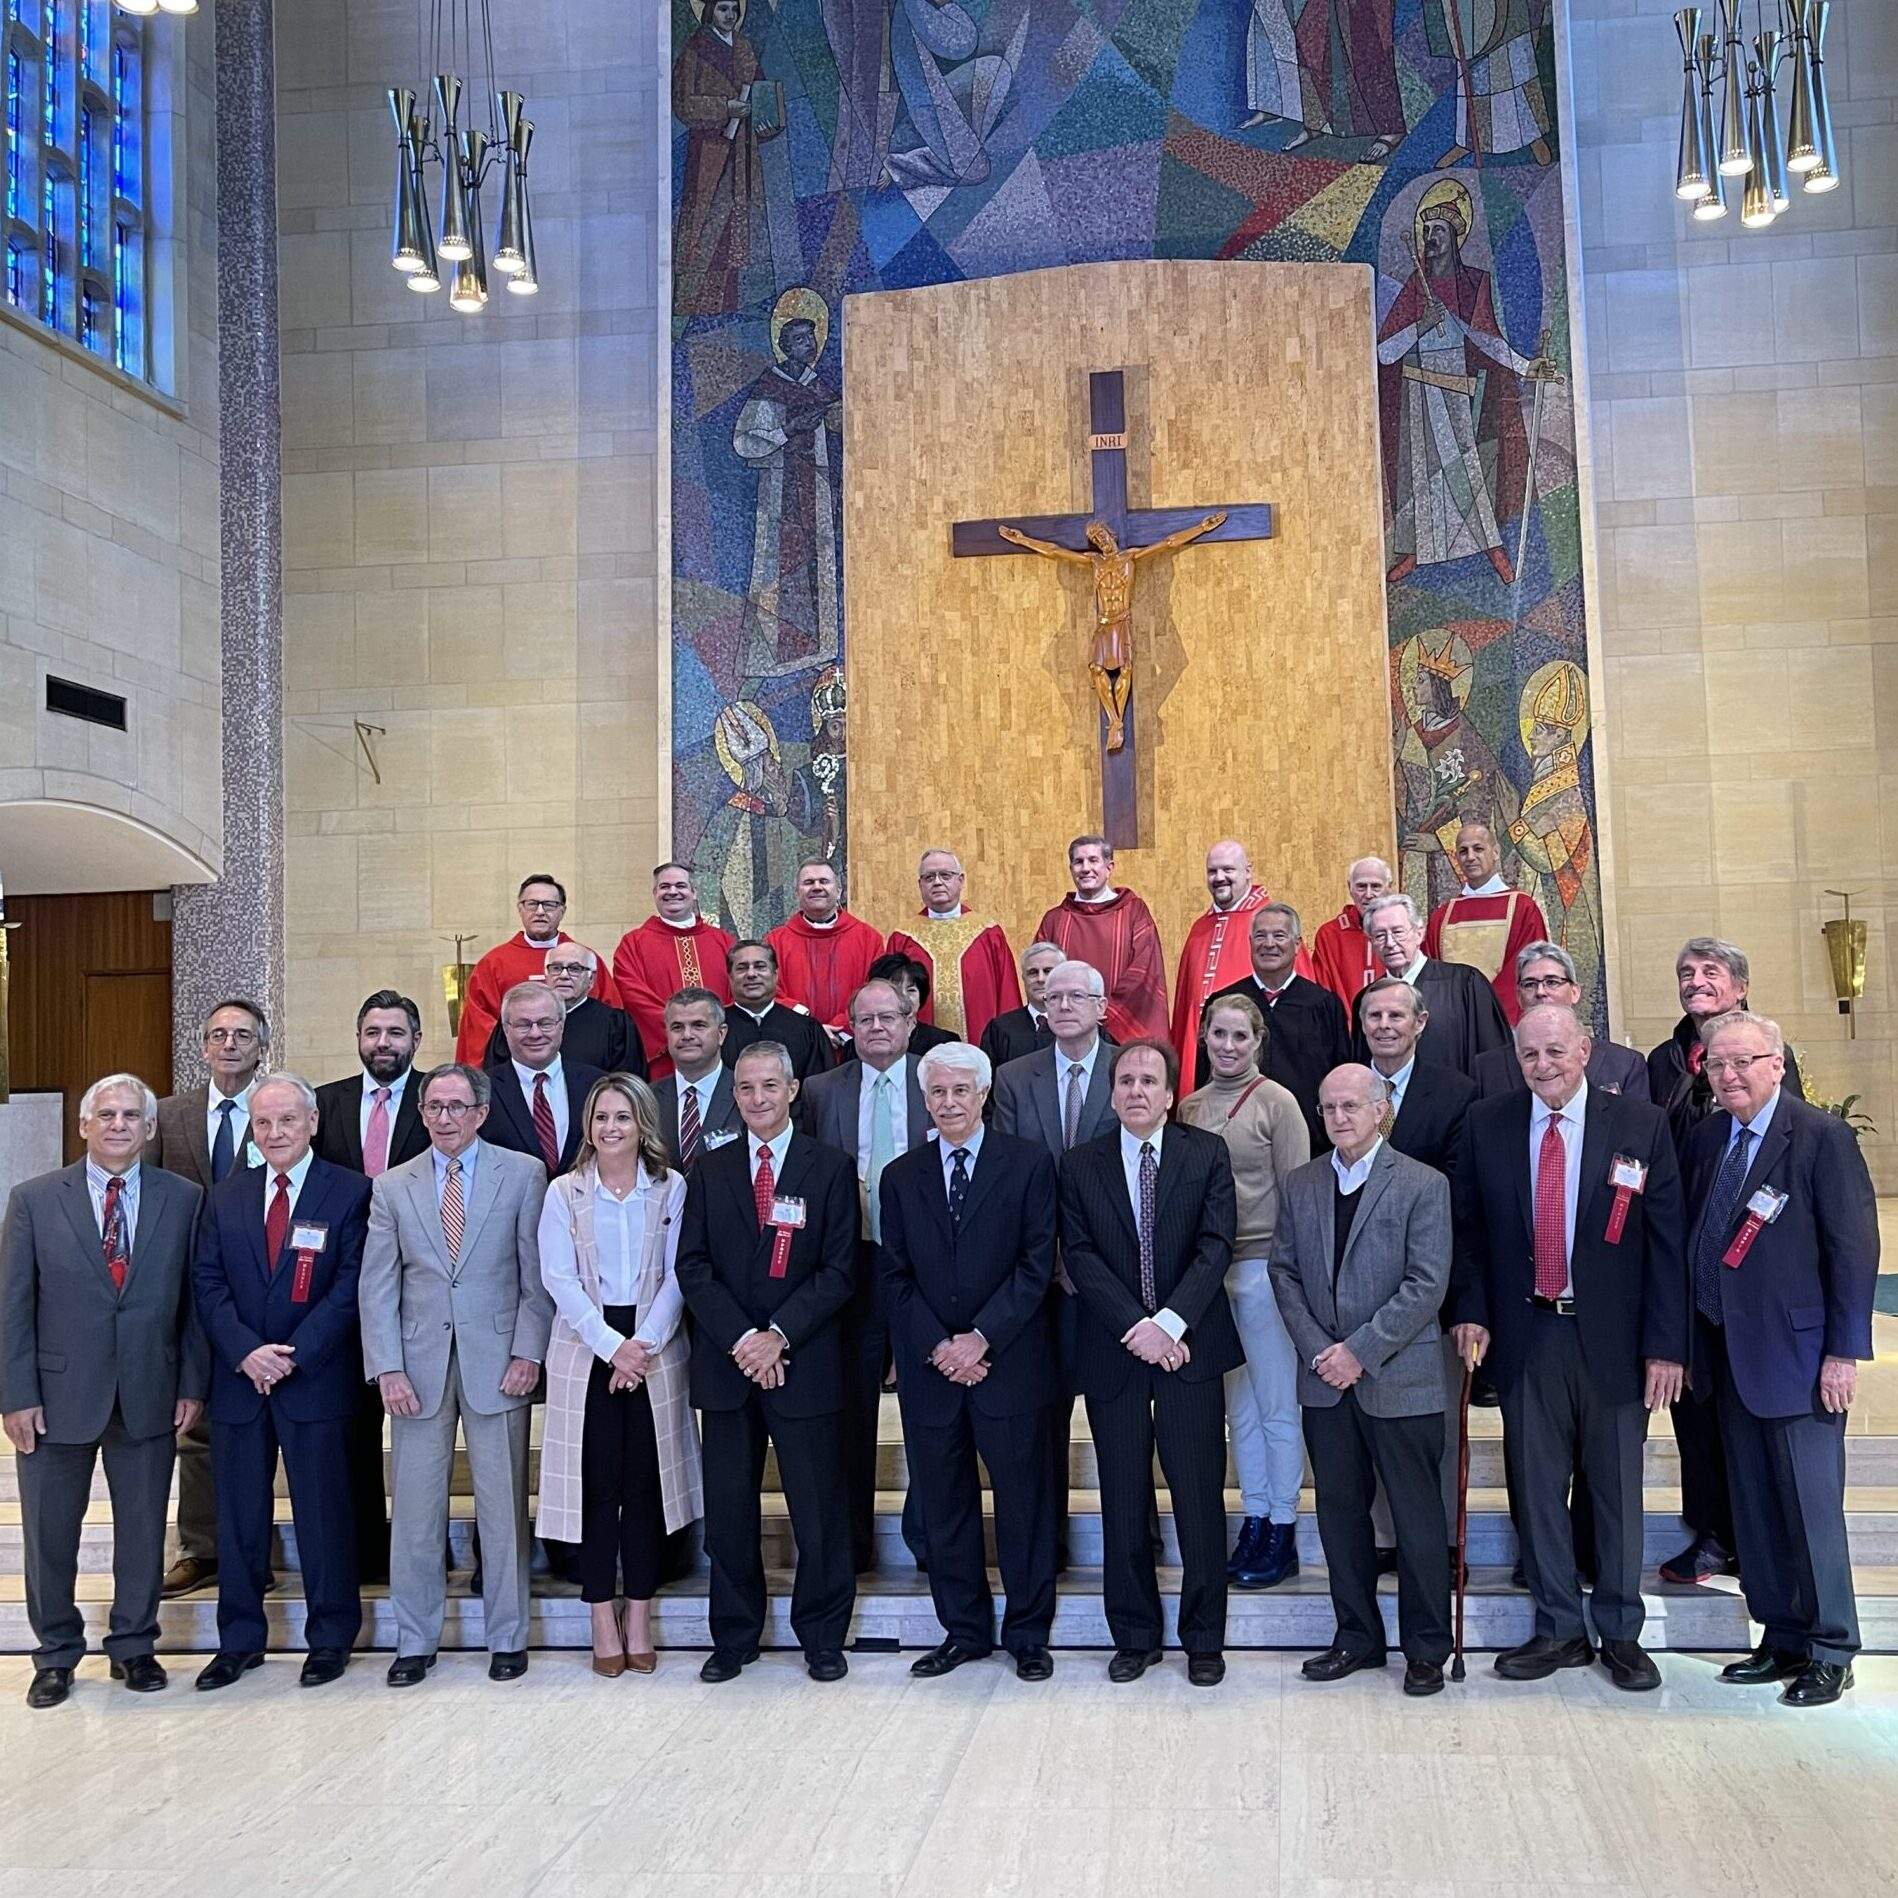 Members of the Legal & Judicial professions gather and smile in St. Columba Cathedral, Youngstown, Ohio for the Annual Red Mass